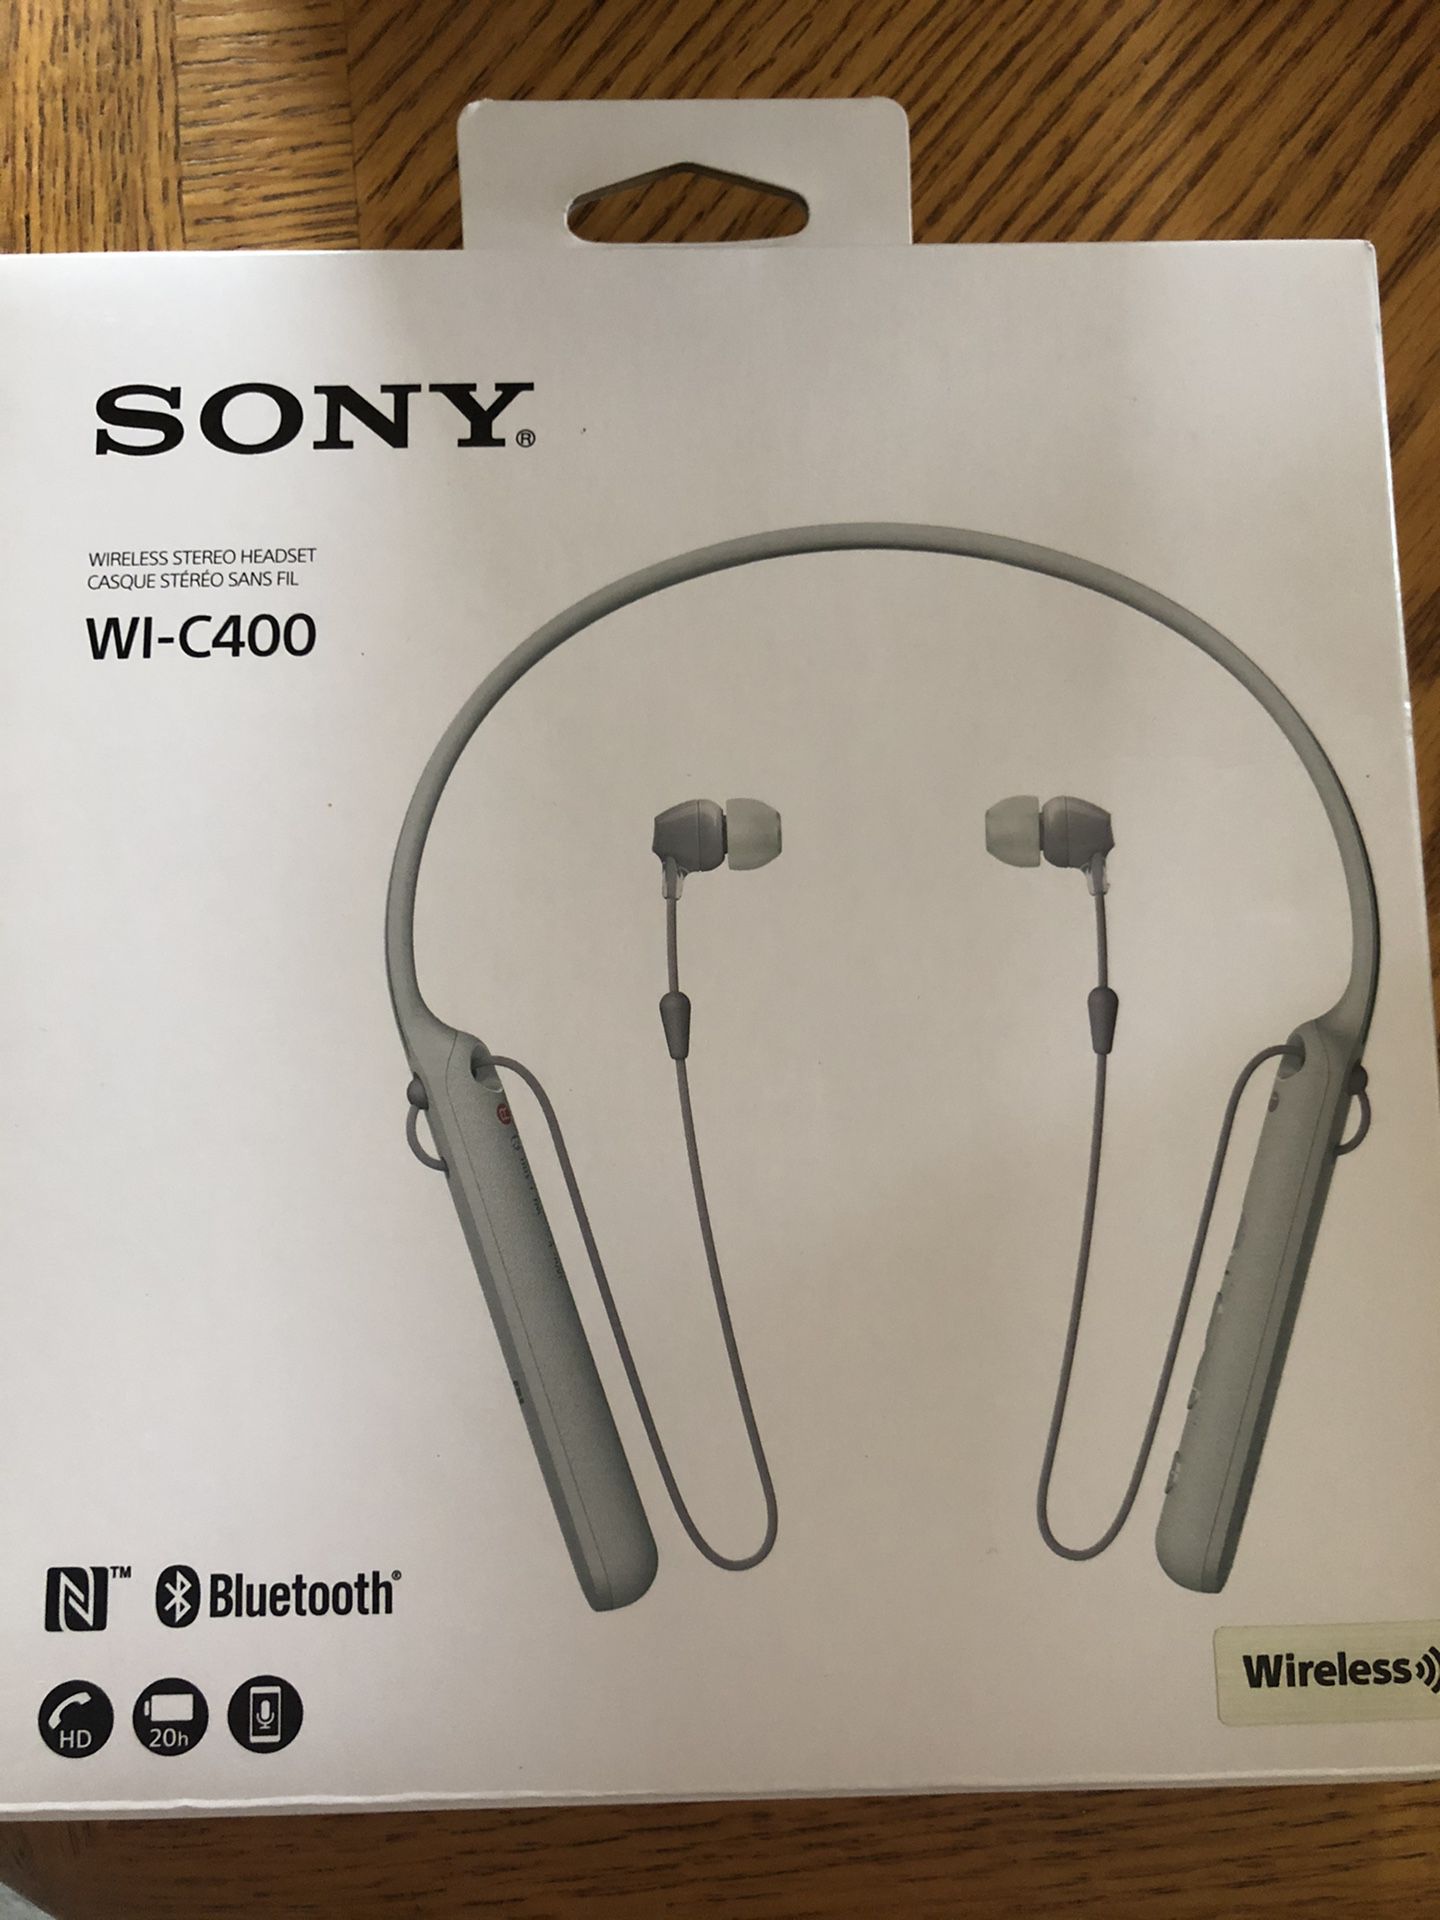 Sony - C400 Wireless Behind-Neck in Ear Headphone White Features & details Easy Bluetooth connectivity with NFC One-touch Up to 20 hours of battery